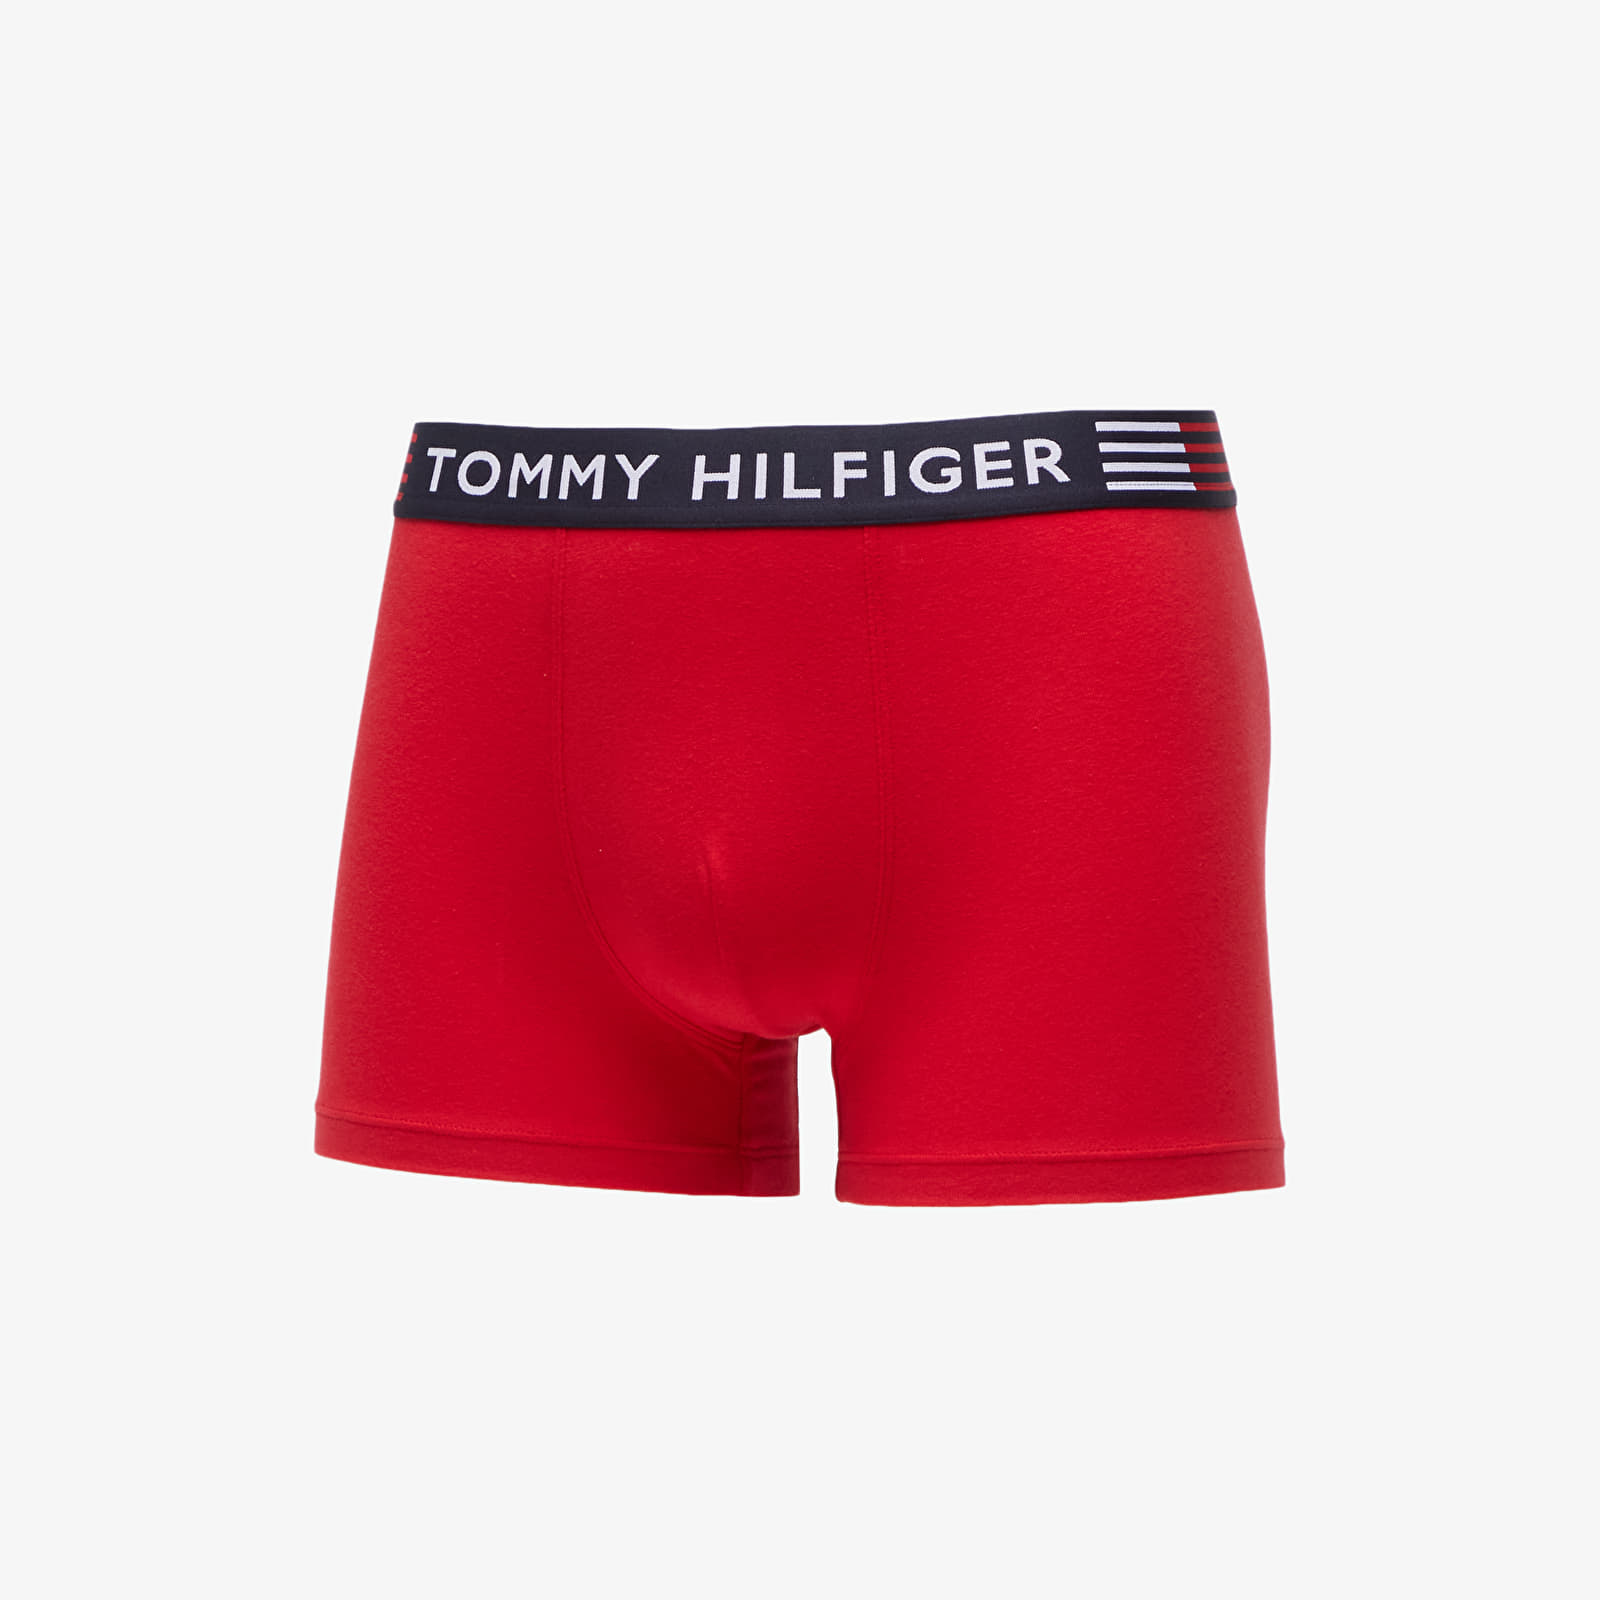 Boxer shorts Tommy Hilfiger Flex Trunks Primary Red